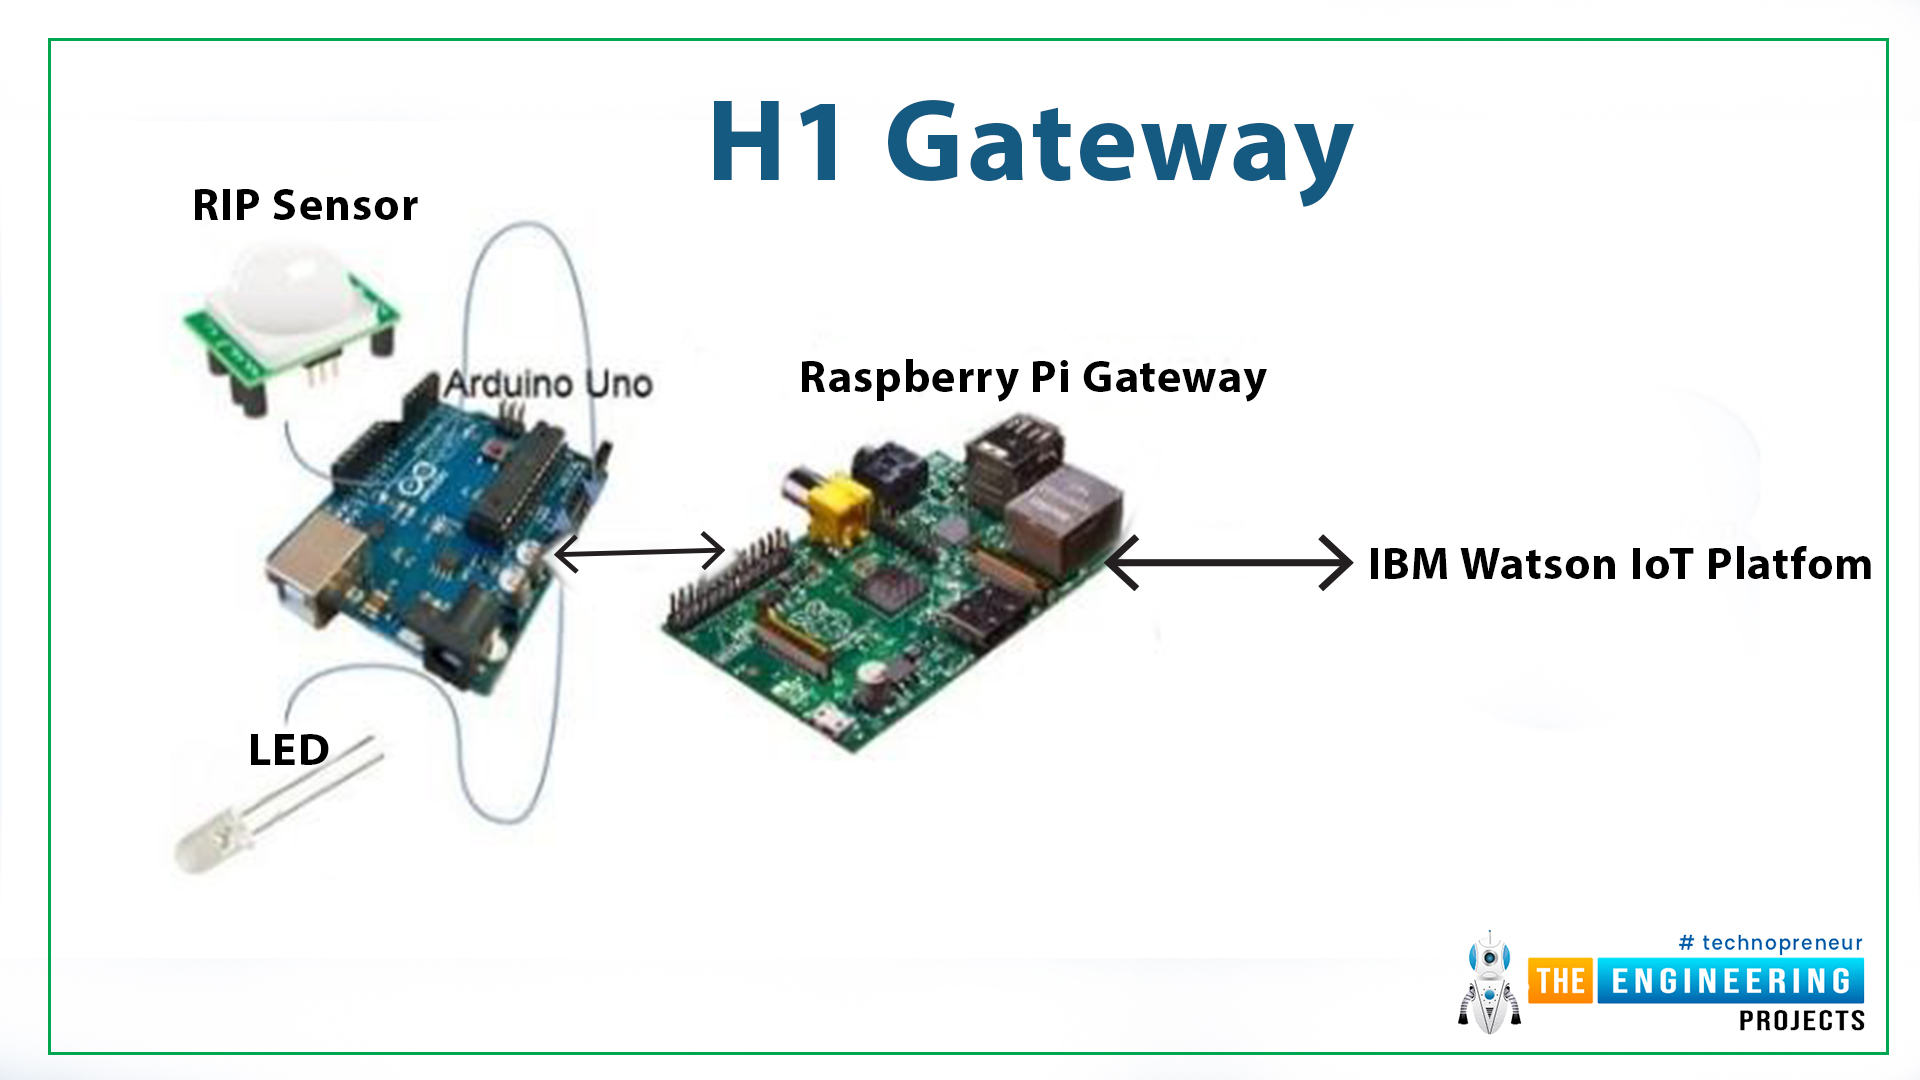 Introduction of IoT components, IoT components, sensors in Iot, connectivity, gateway, cloud computing, user interface, GUI